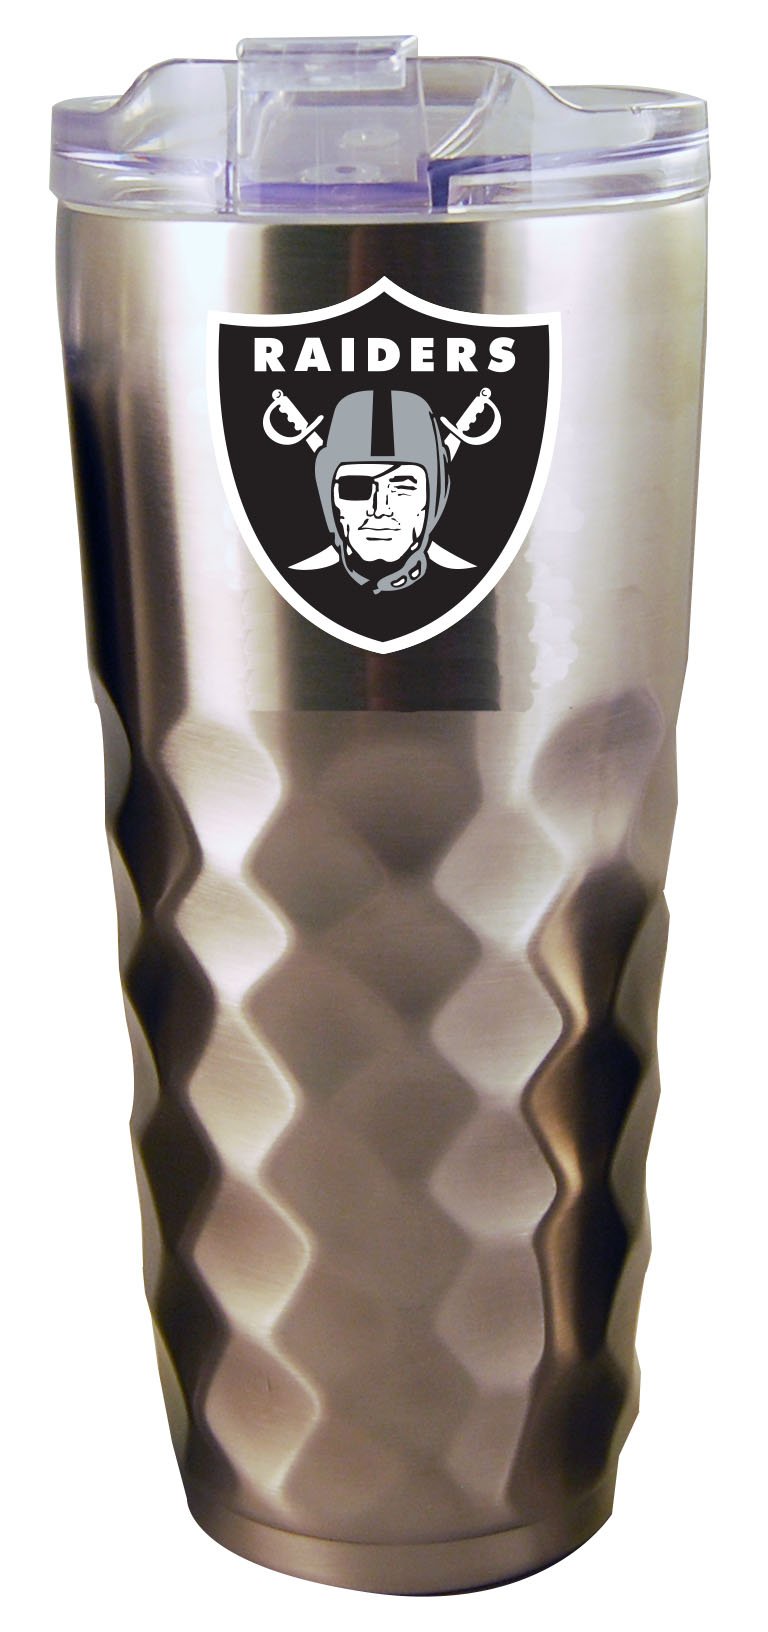 32OZ SS DIAMD TMBLR RAIDERS
CurrentProduct, Drinkware_category_All, NFL, ORA
The Memory Company